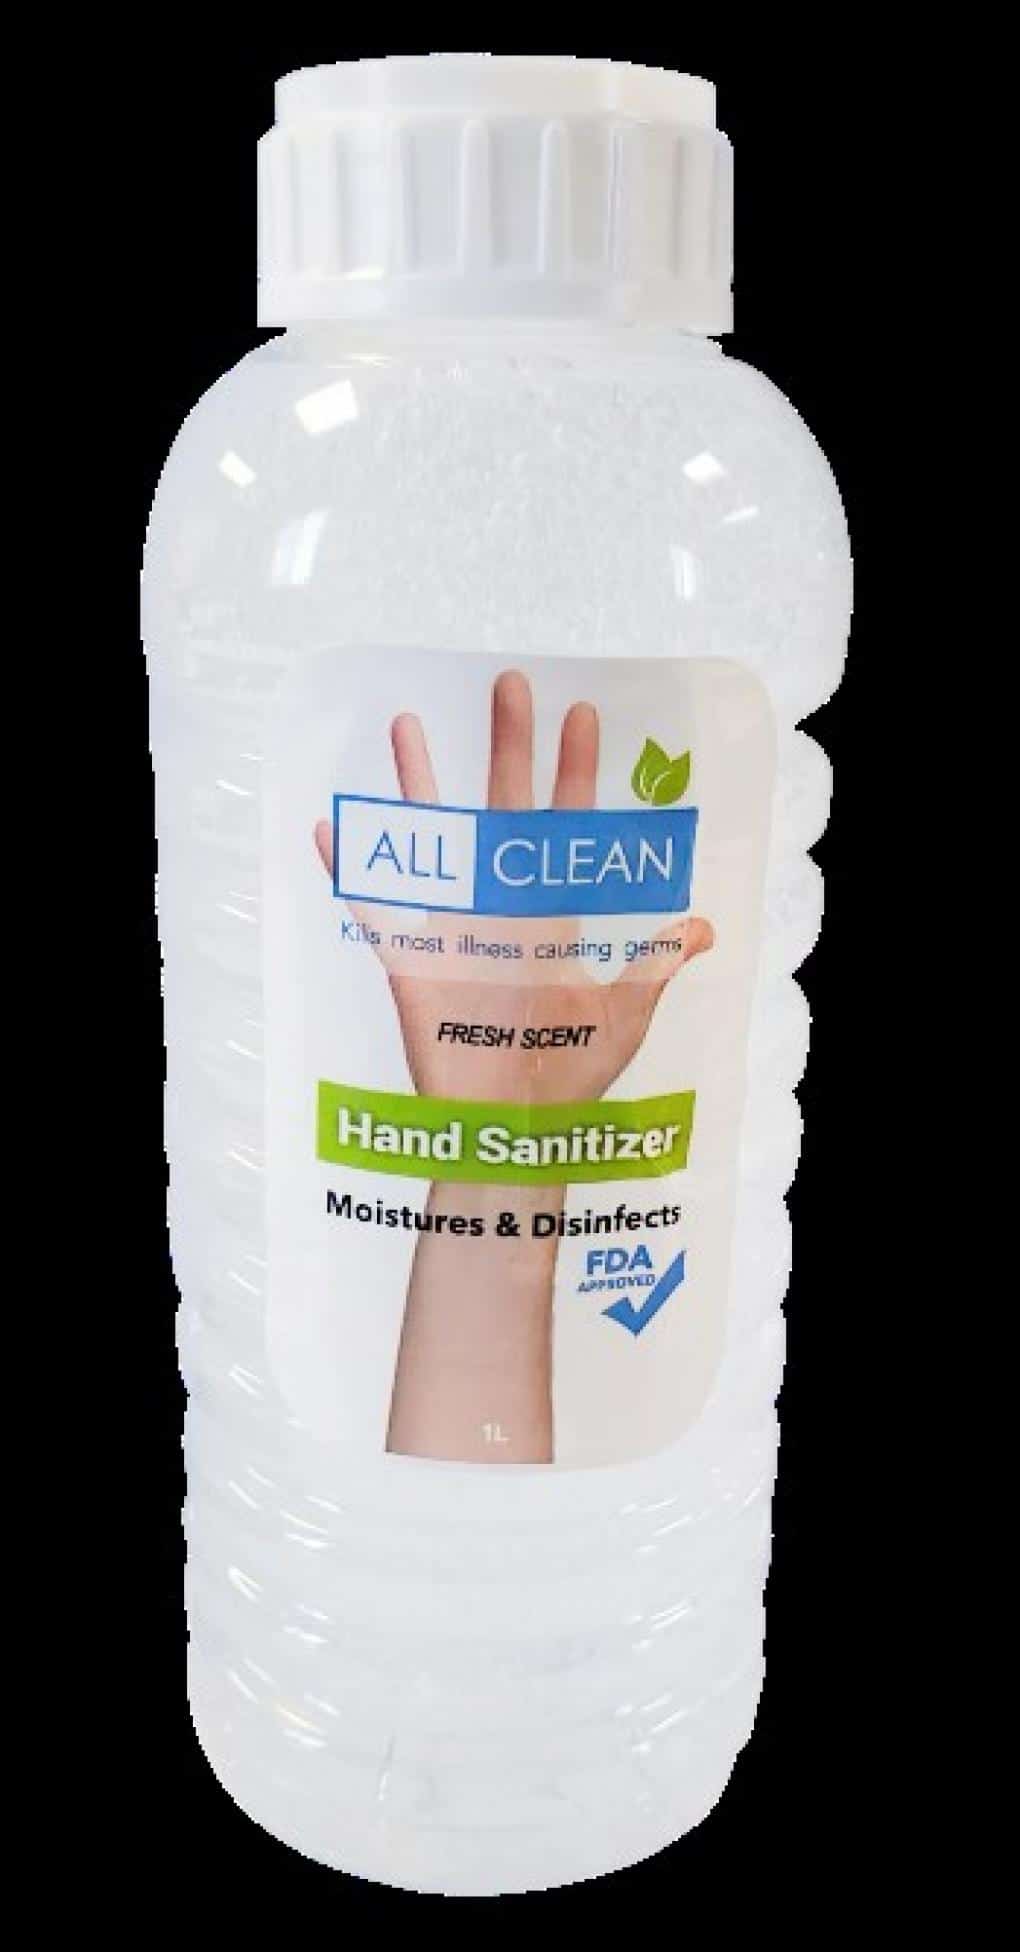 All Clean Hand Sanitizer Recalled for Toxic Methanol